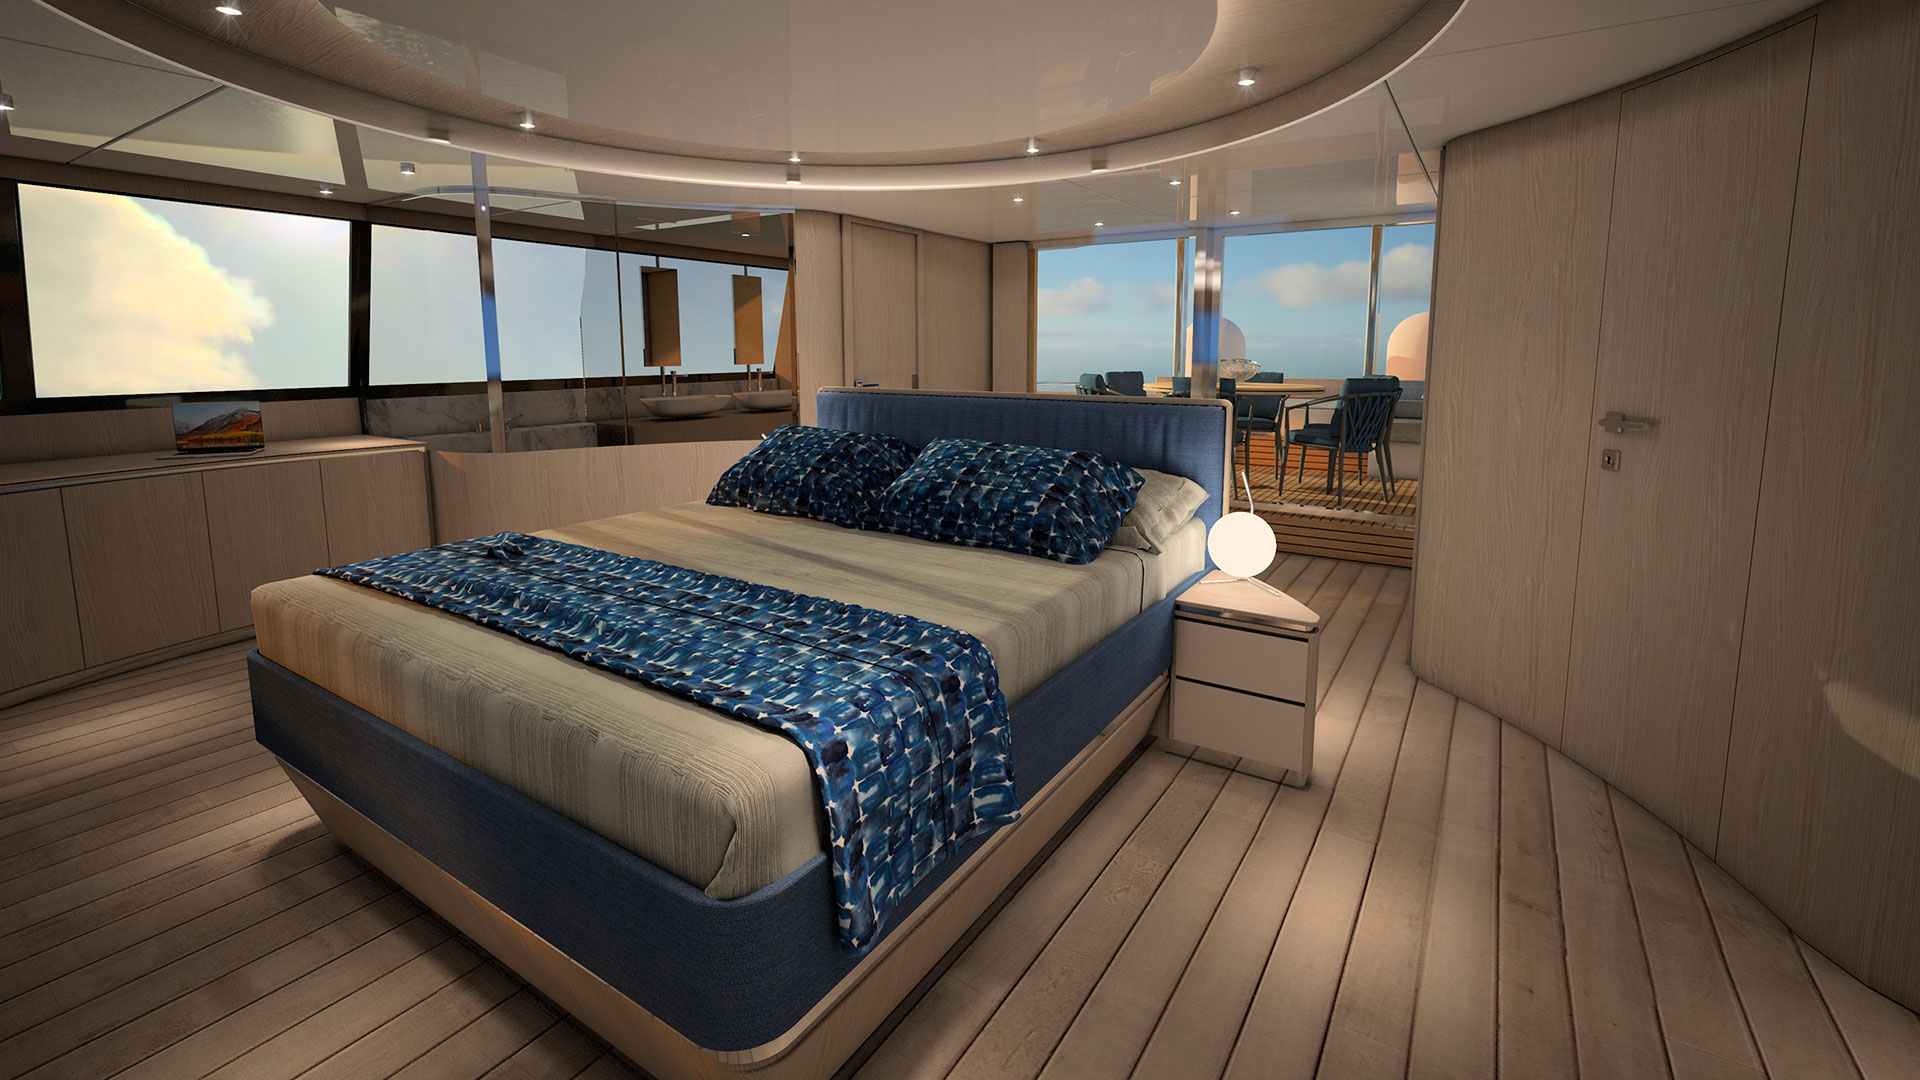 Owner’s suite on the 3rd deck in blue colors